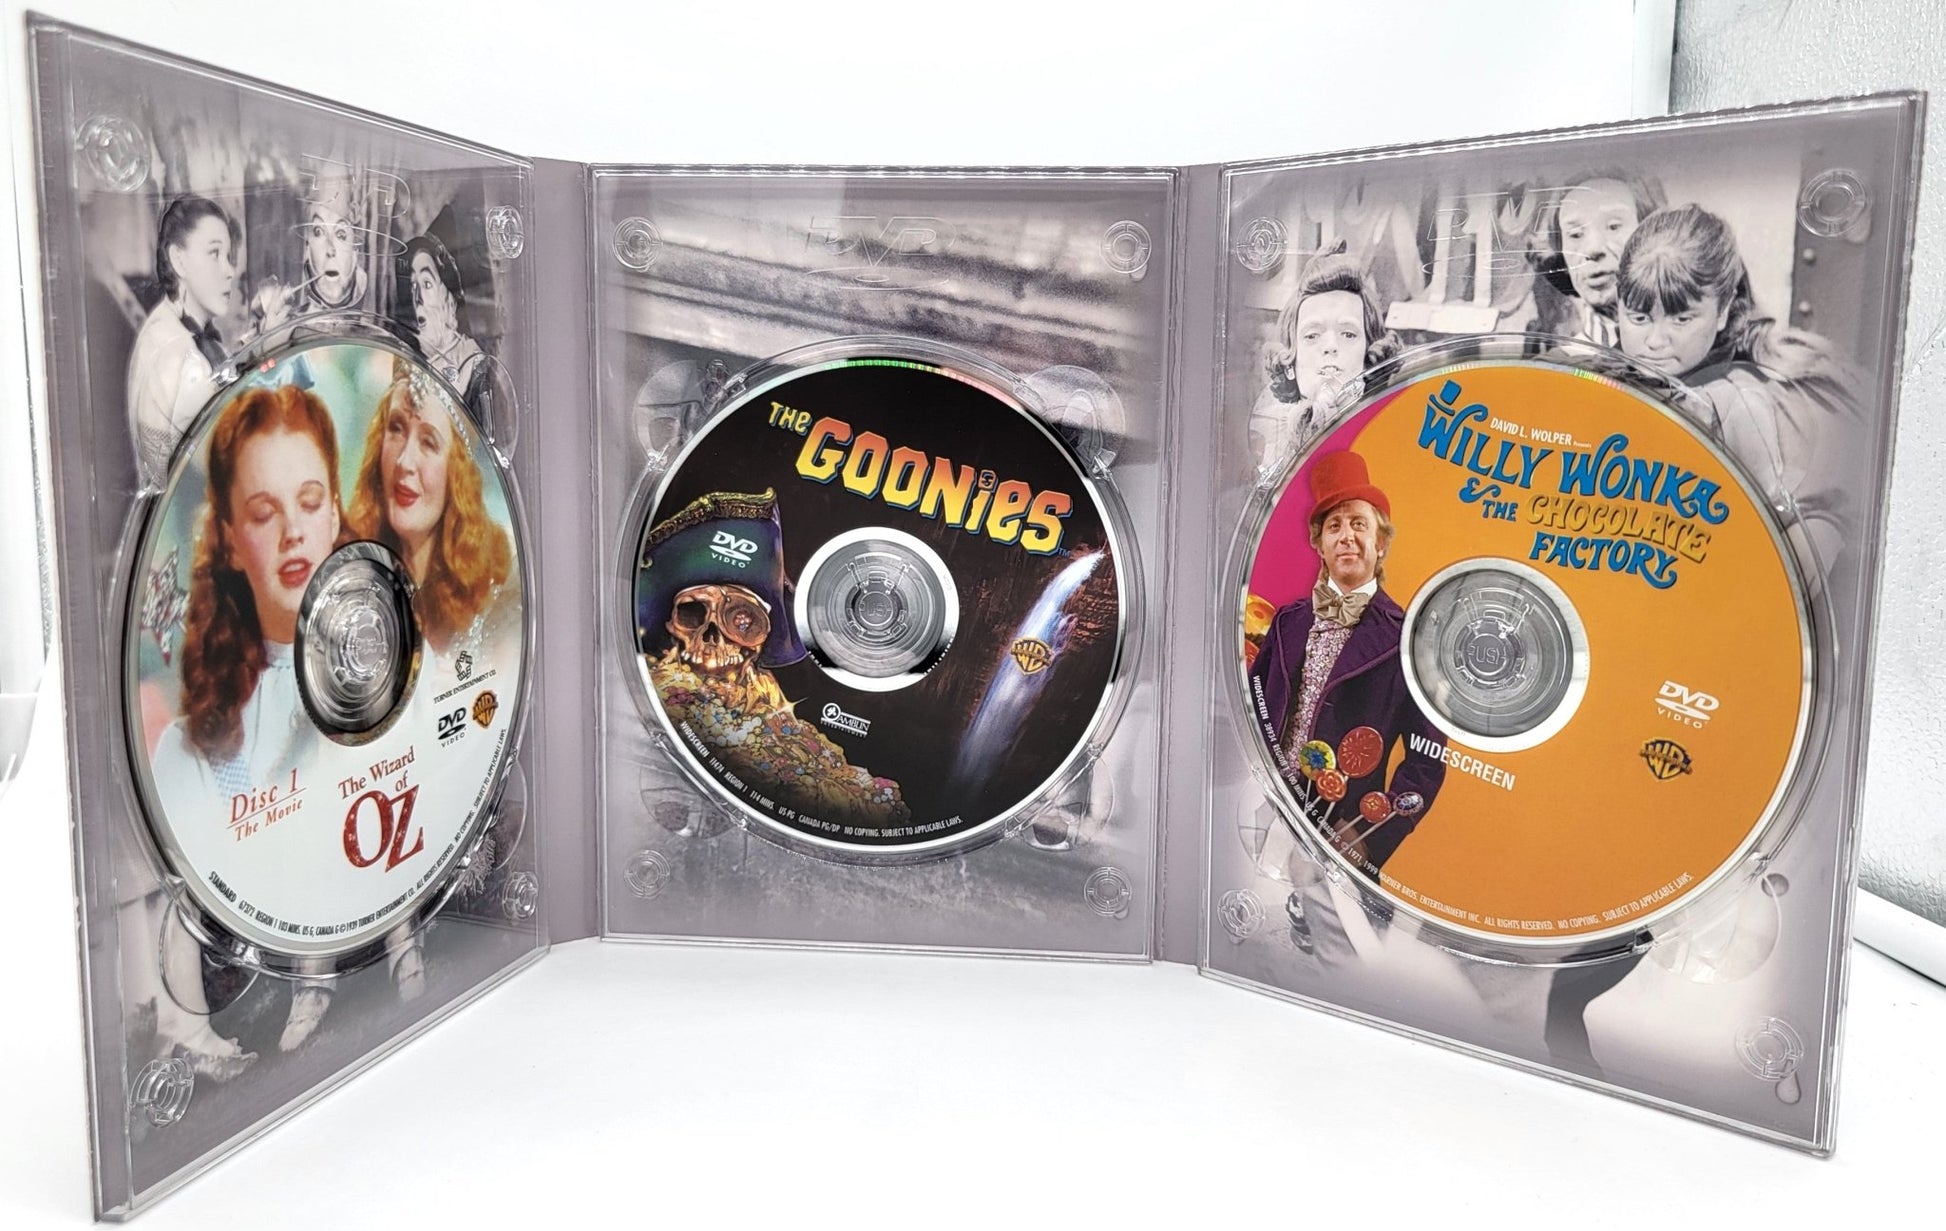 Warner Home Video - Essential Classic Family Films | DVD | 3 of the Greatest Films Ever Made - DVD - Steady Bunny Shop